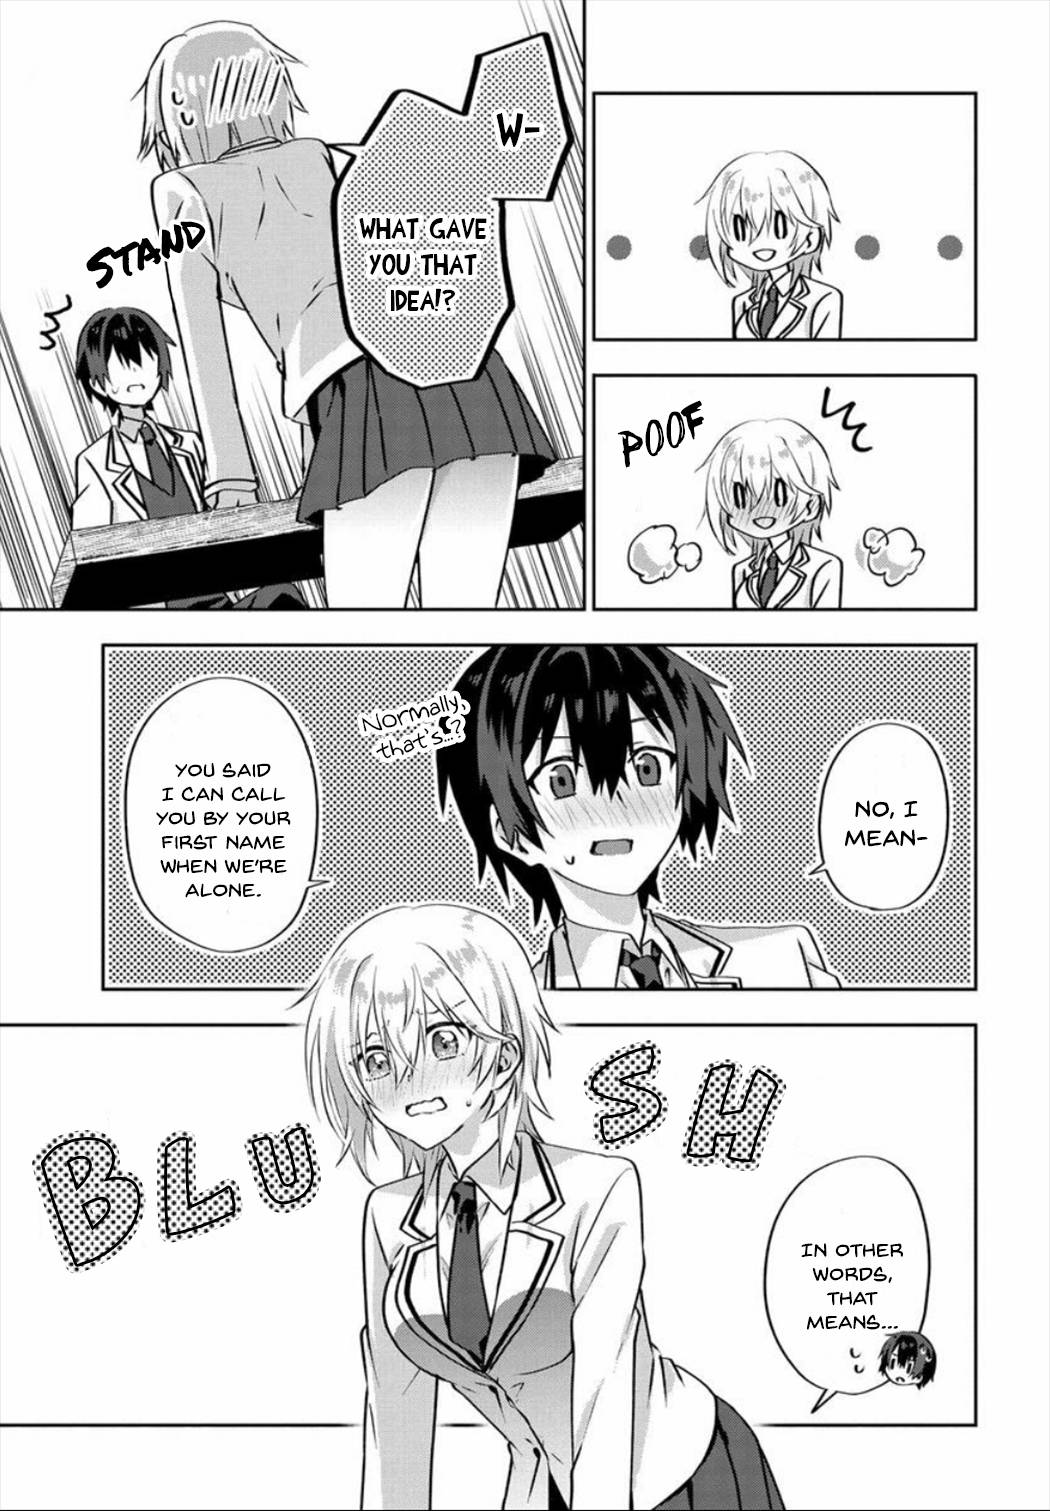 Since I’Ve Entered The World Of Romantic Comedy Manga, I’Ll Do My Best To Make The Losing Heroine Happy - chapter 4.1 - #6